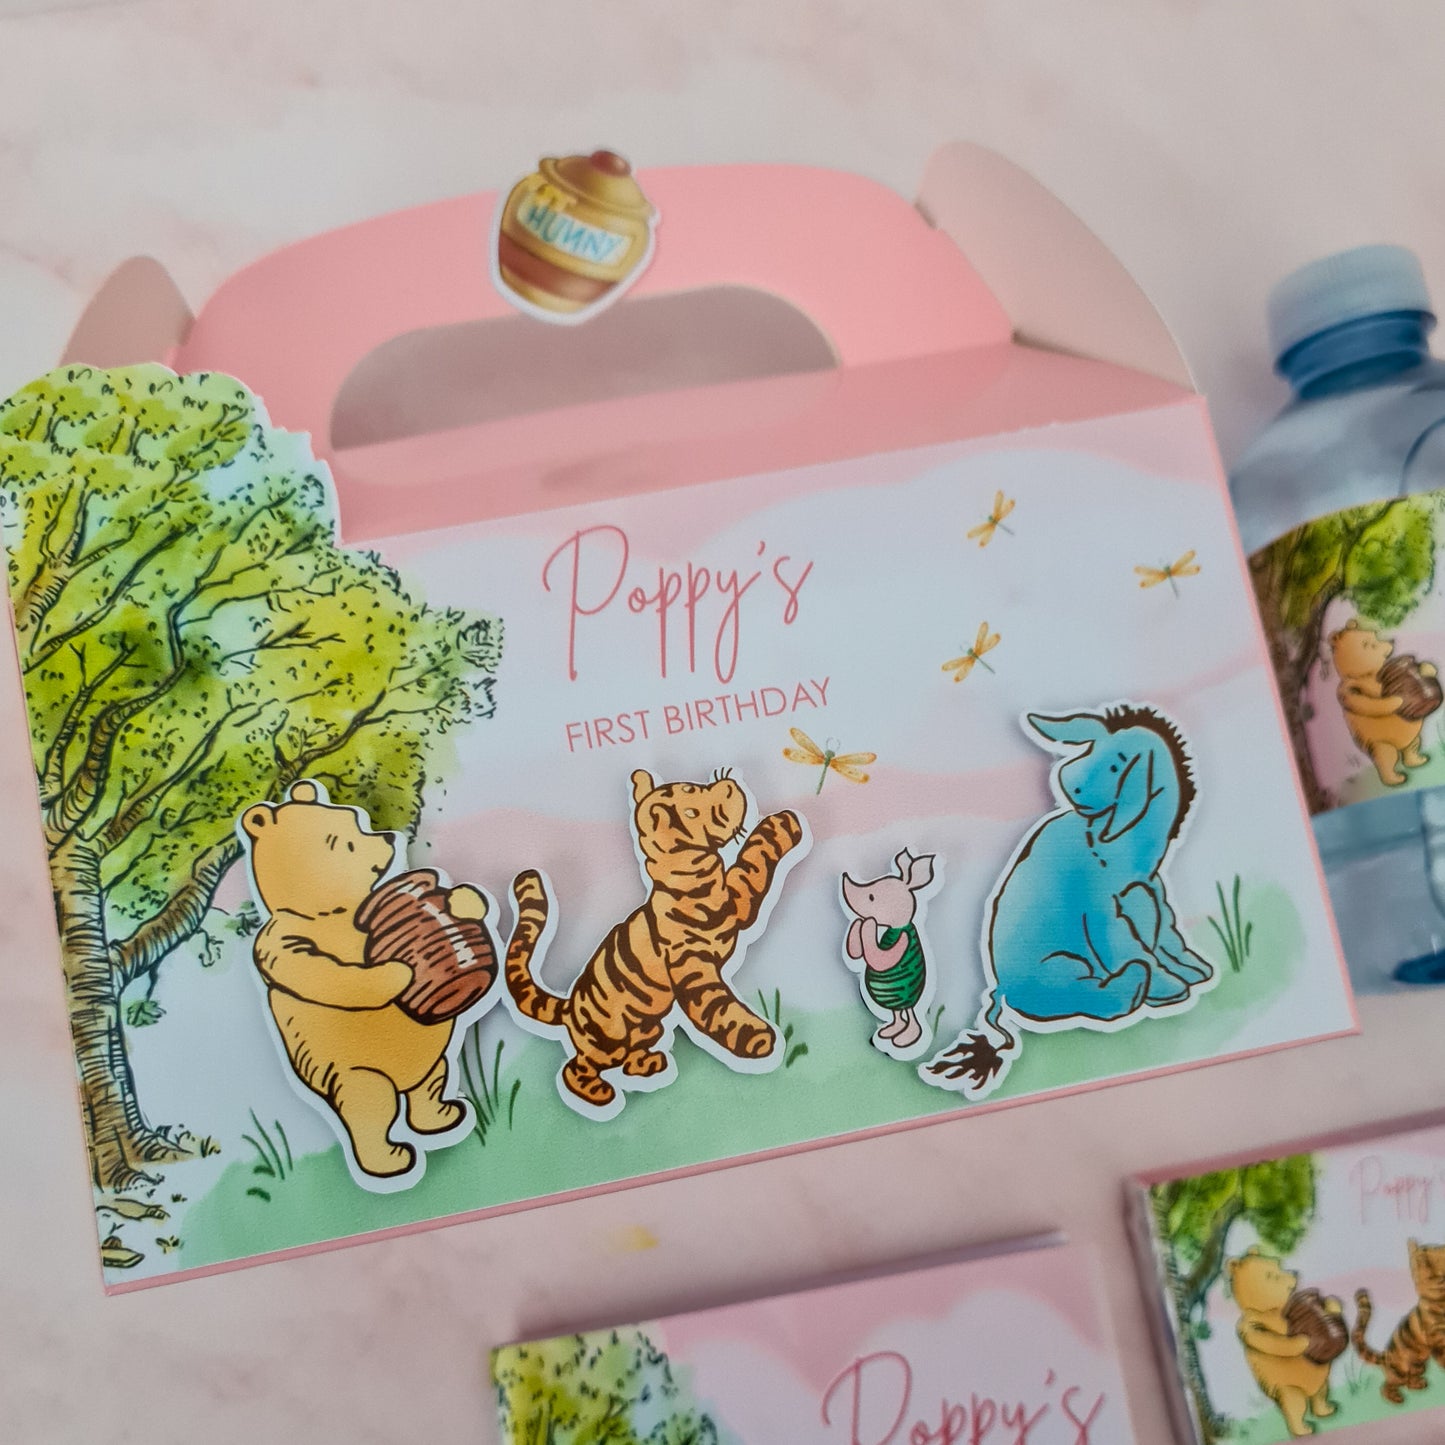 Classic Pink Winnie the Pooh Party Box